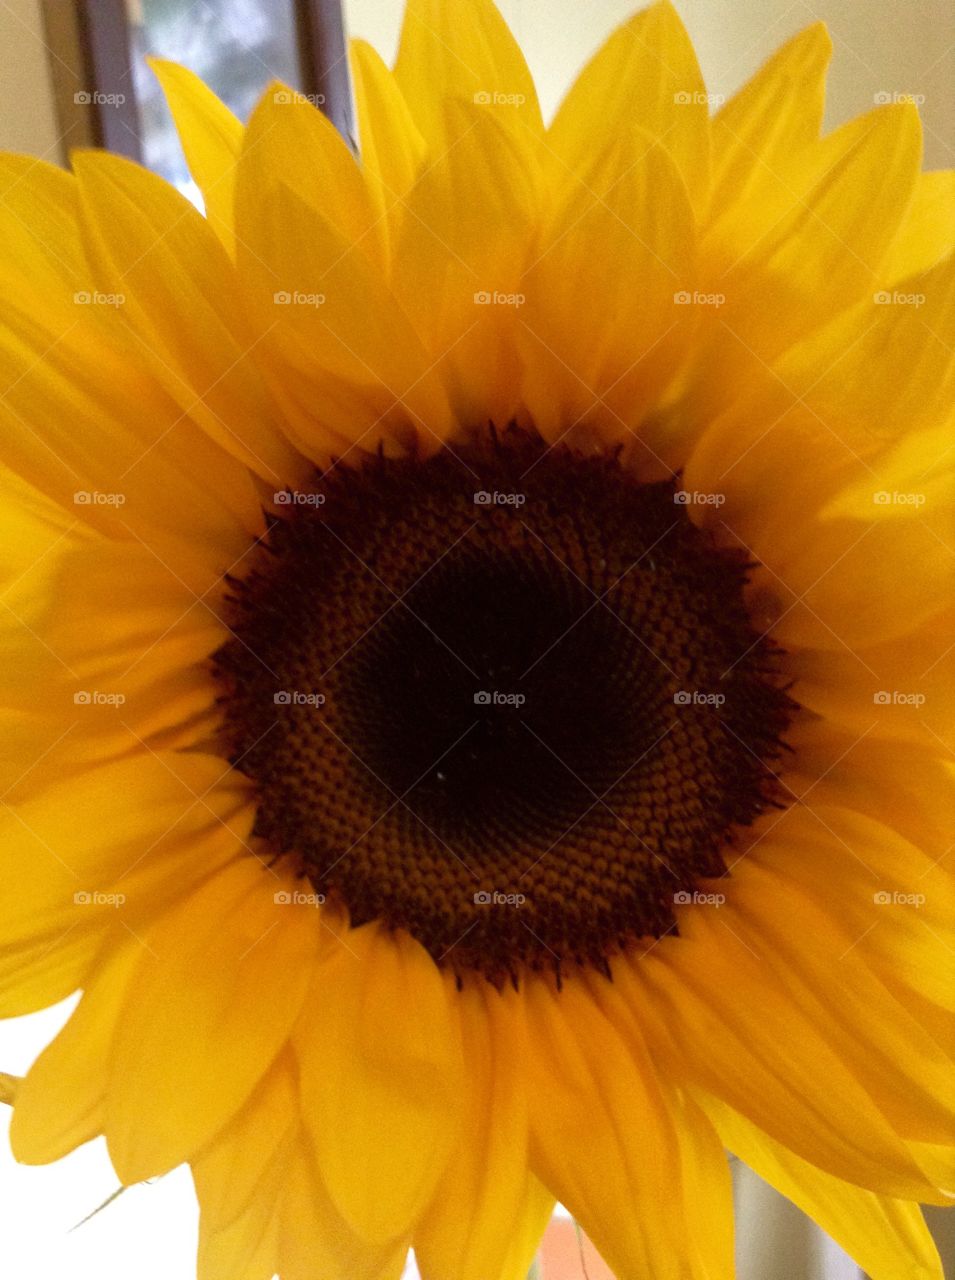 Sunflower . This the season for the sunflower to bloom.